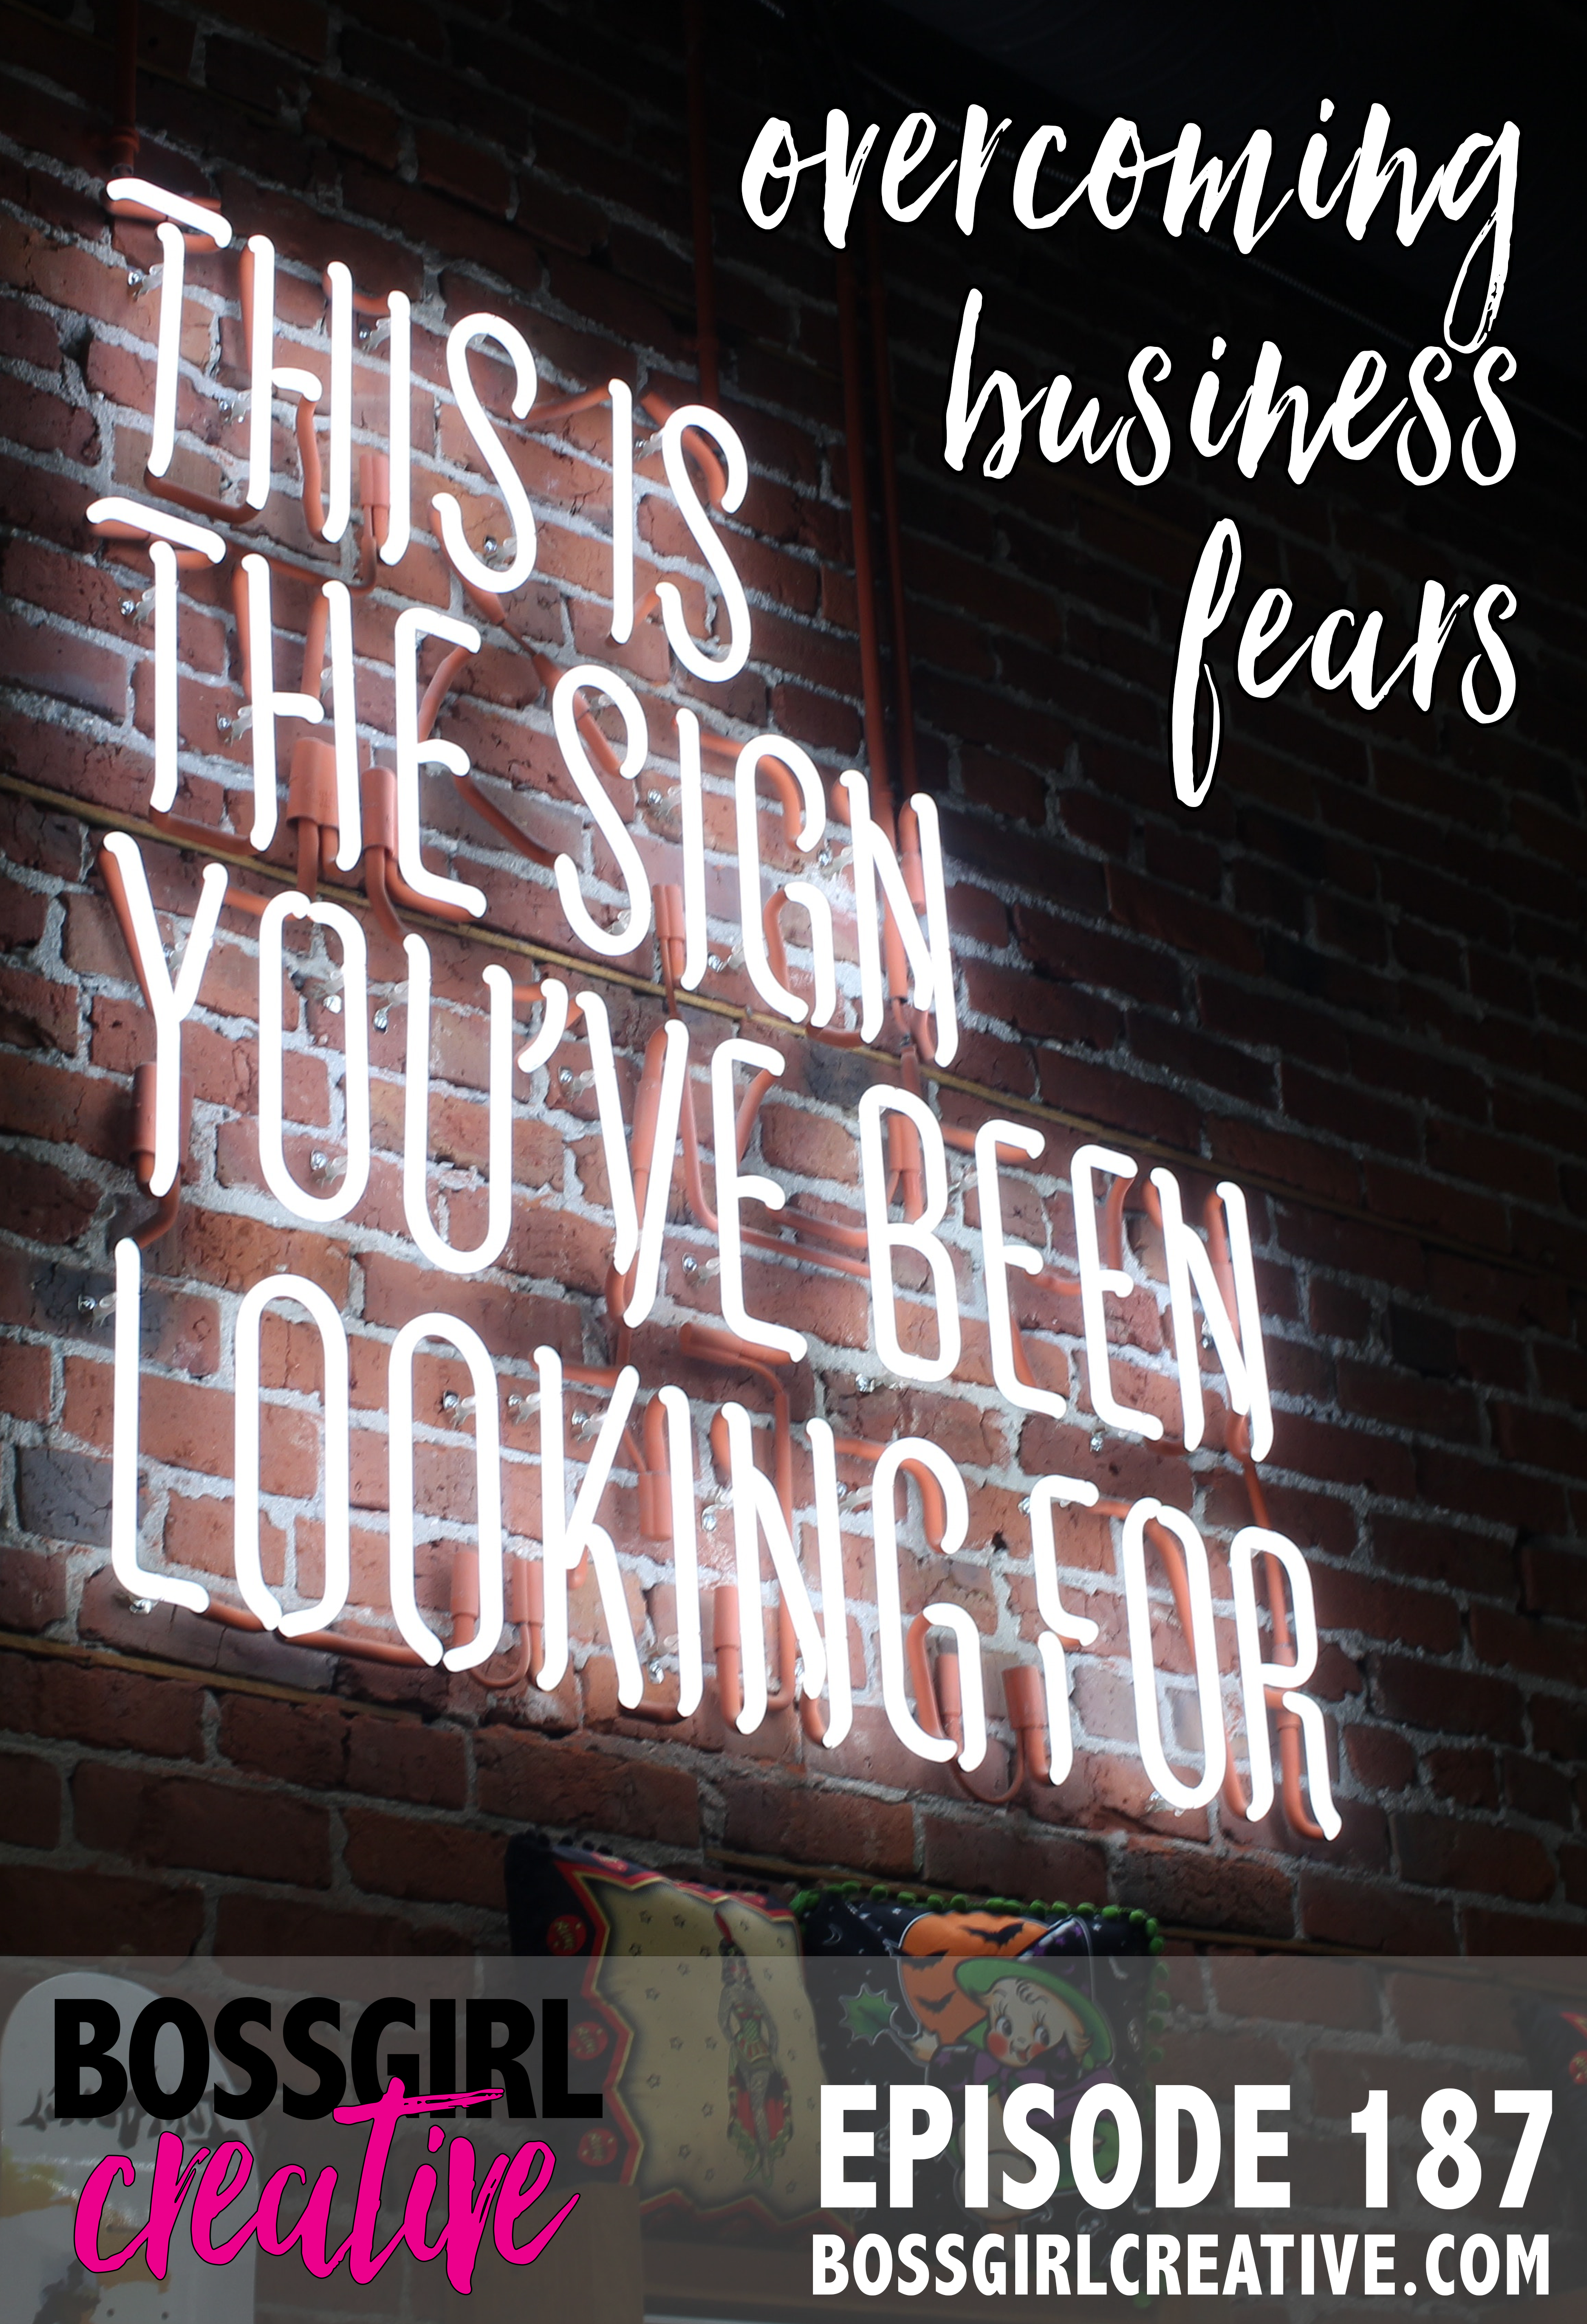 Have you ever had one of your business fears realized? Do you have a fear of having that happen? Take a listen to this episode of the Boss Girl Creative podcast which is all about overcoming your business fears.